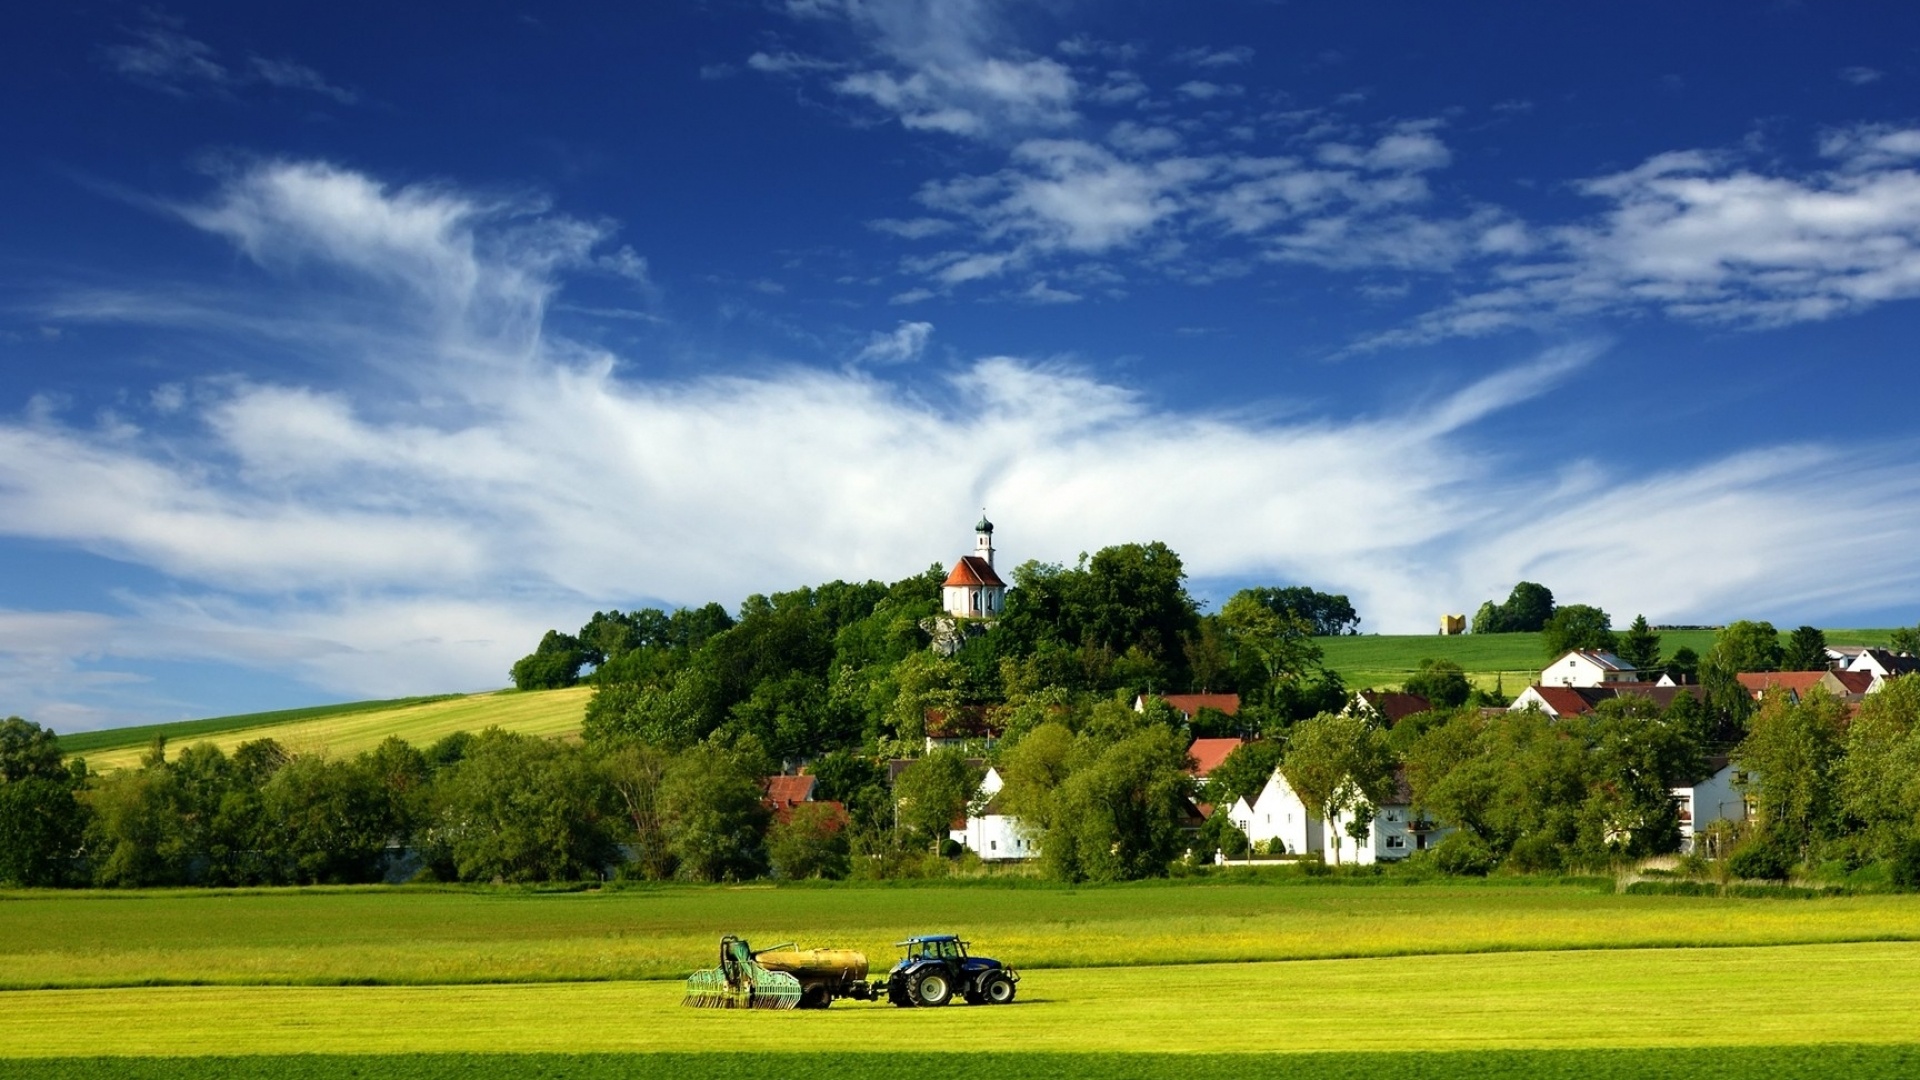 Tractor Village Country Desktop Pc And Mac Wallpaper